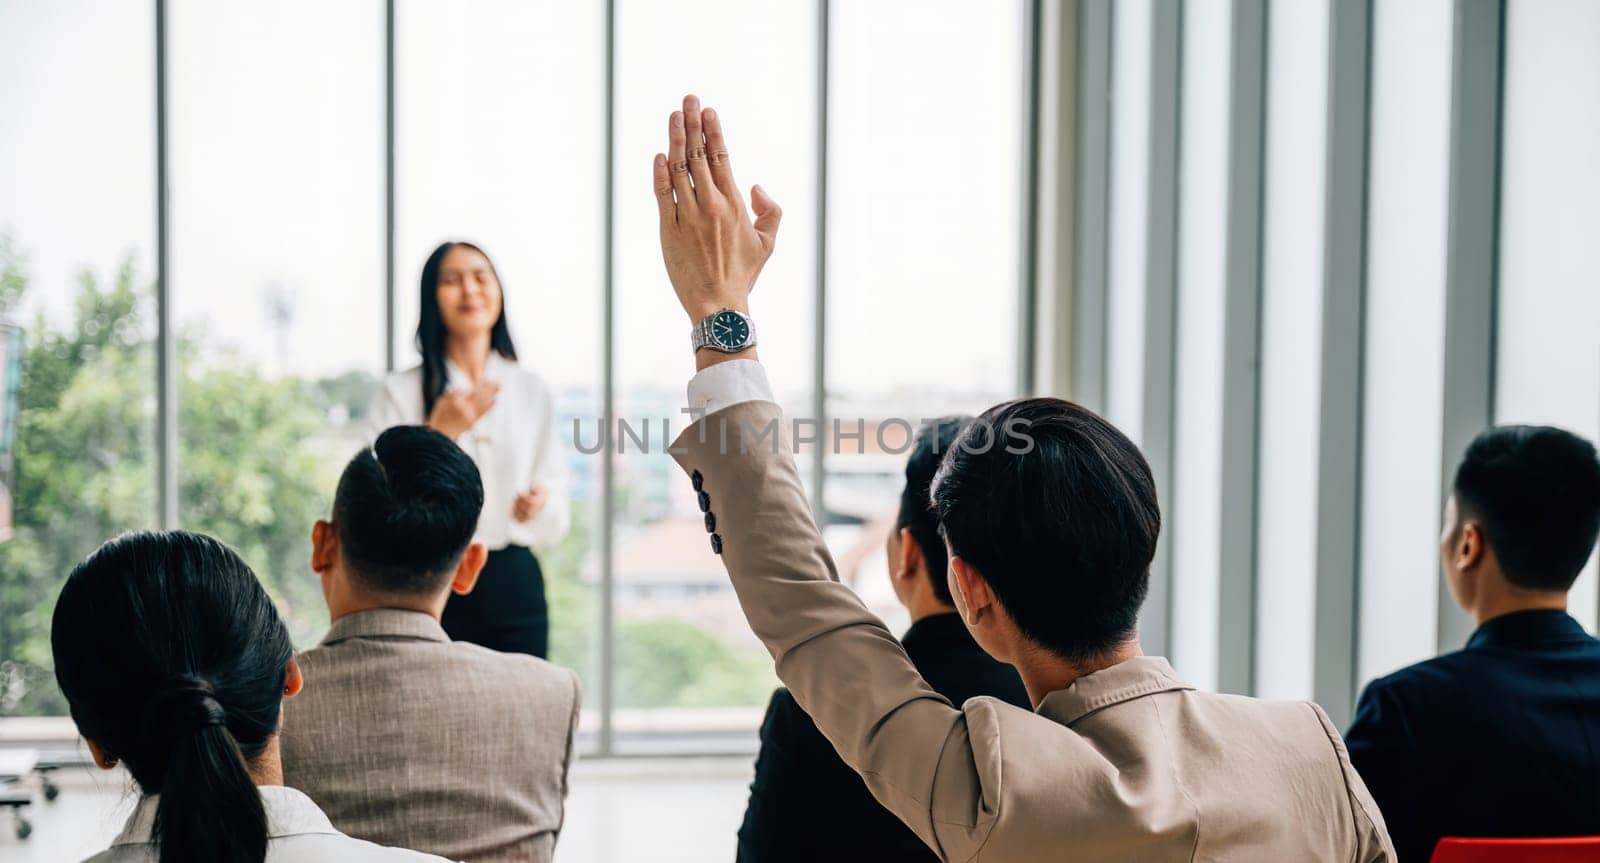 Active participation in a conference seminar classroom, with a large group raising hands. The answers lie within the engaged audience, signifying collaborative learning. by Sorapop